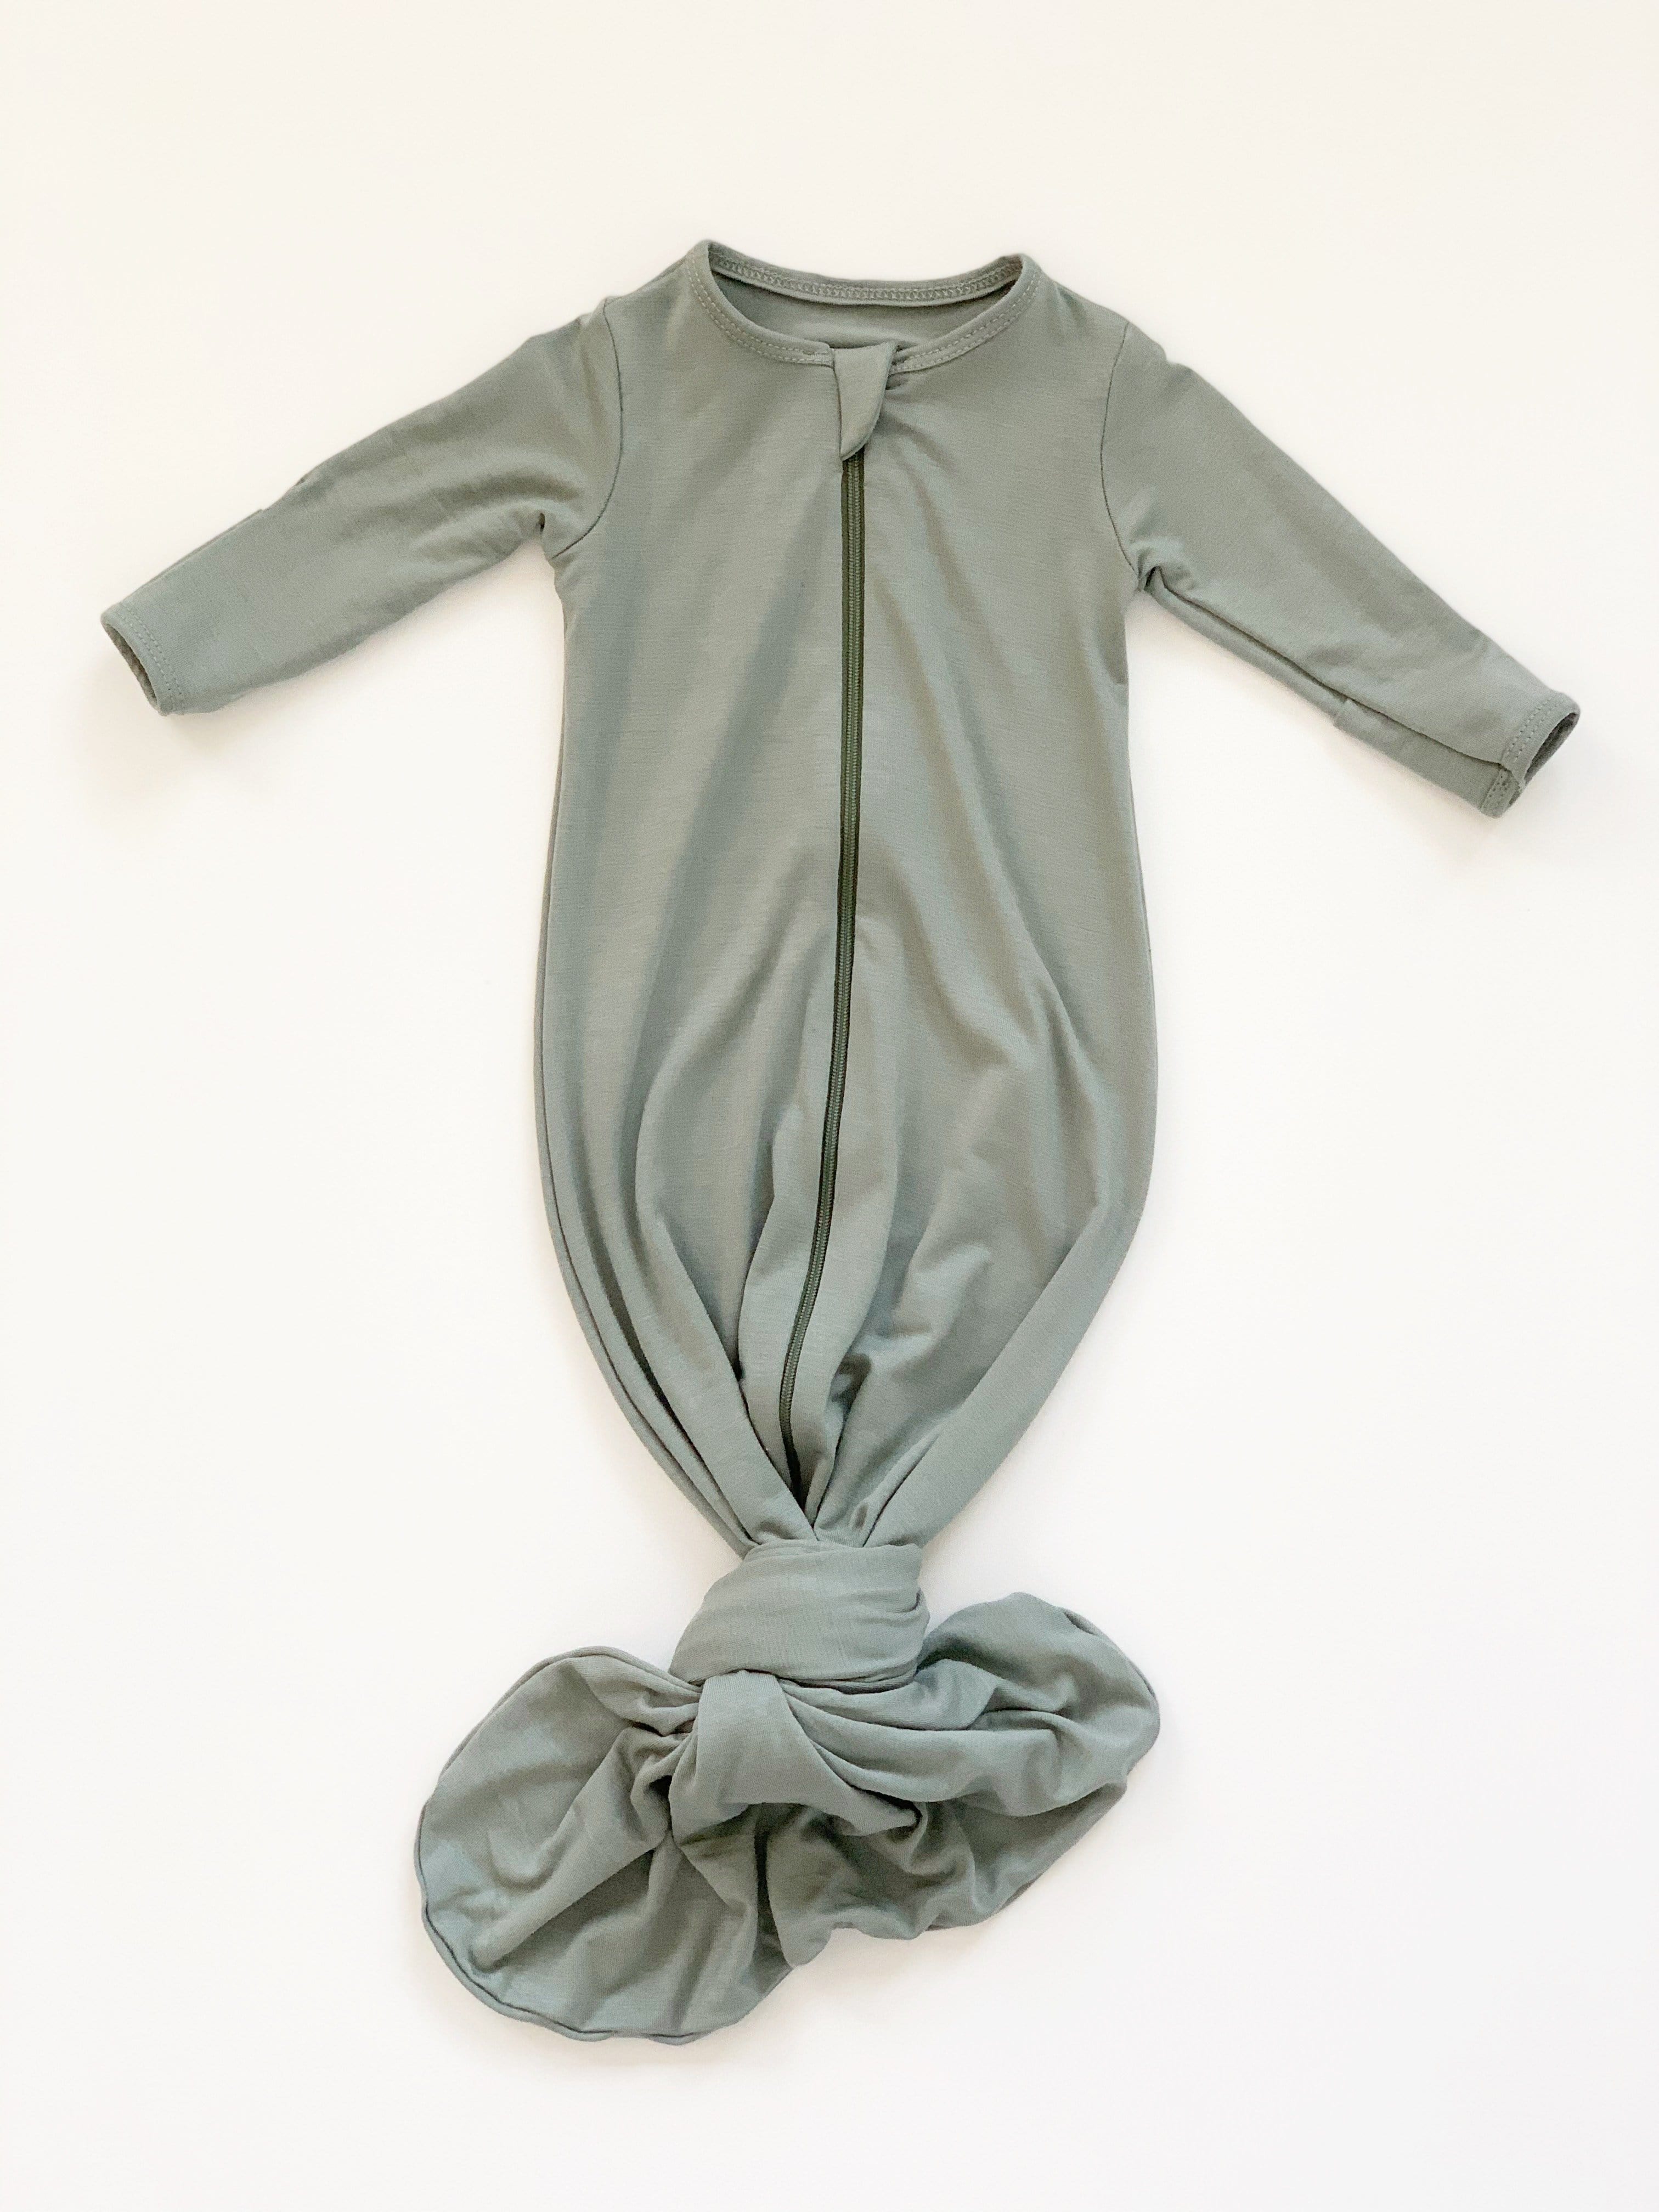 KNOTTED BABY GOWN IN ARMY GREEN